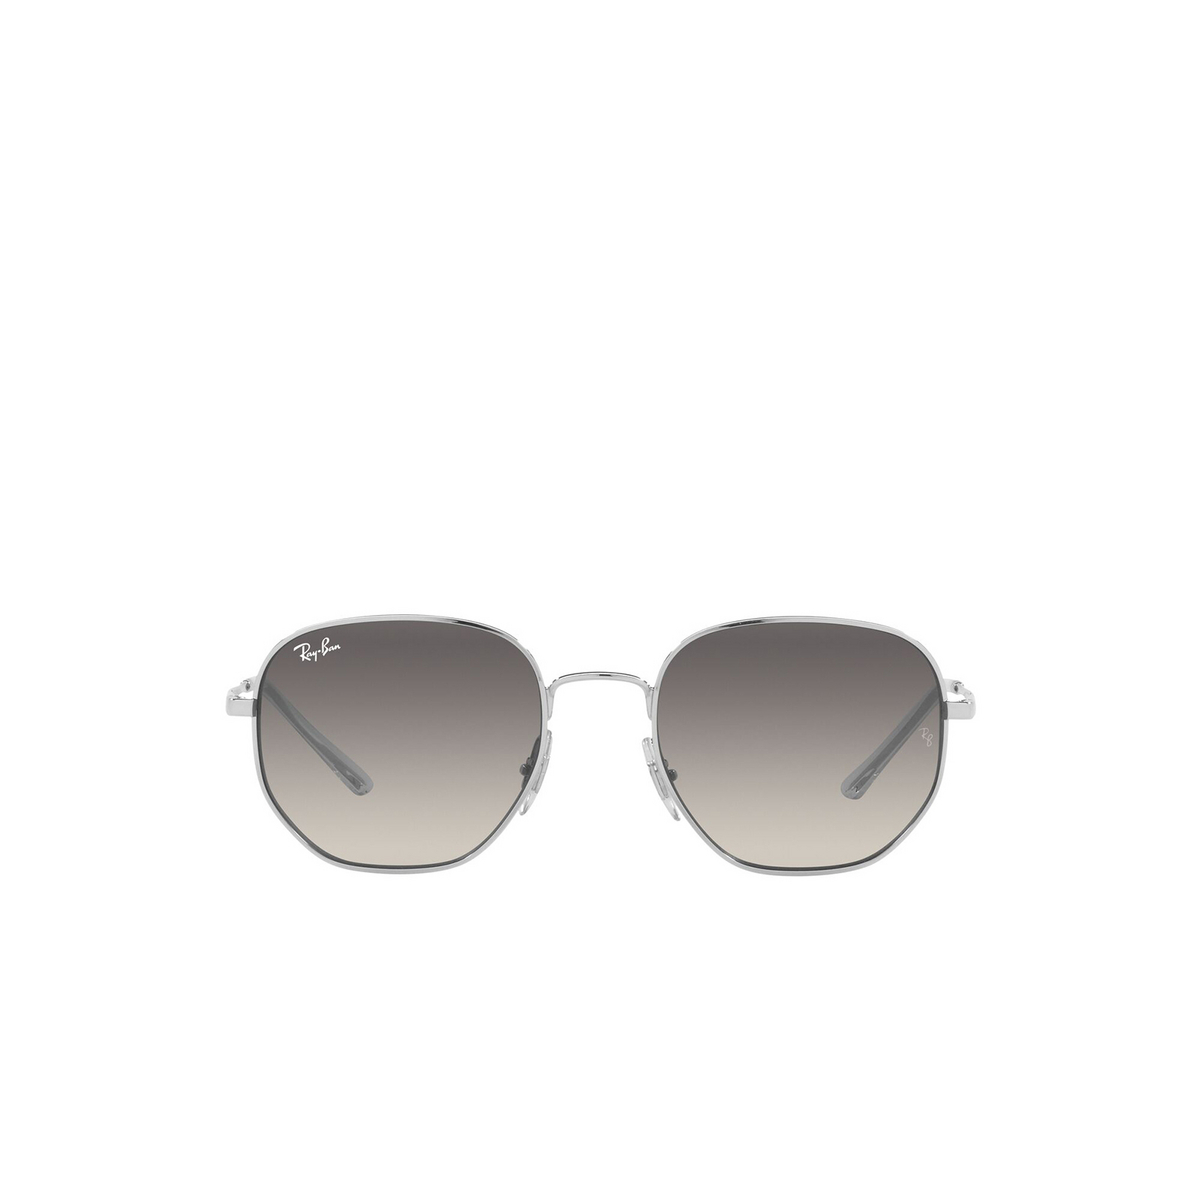 Ray-Ban® Irregular Sunglasses: RB3682 color Silver 003/11 - front view.